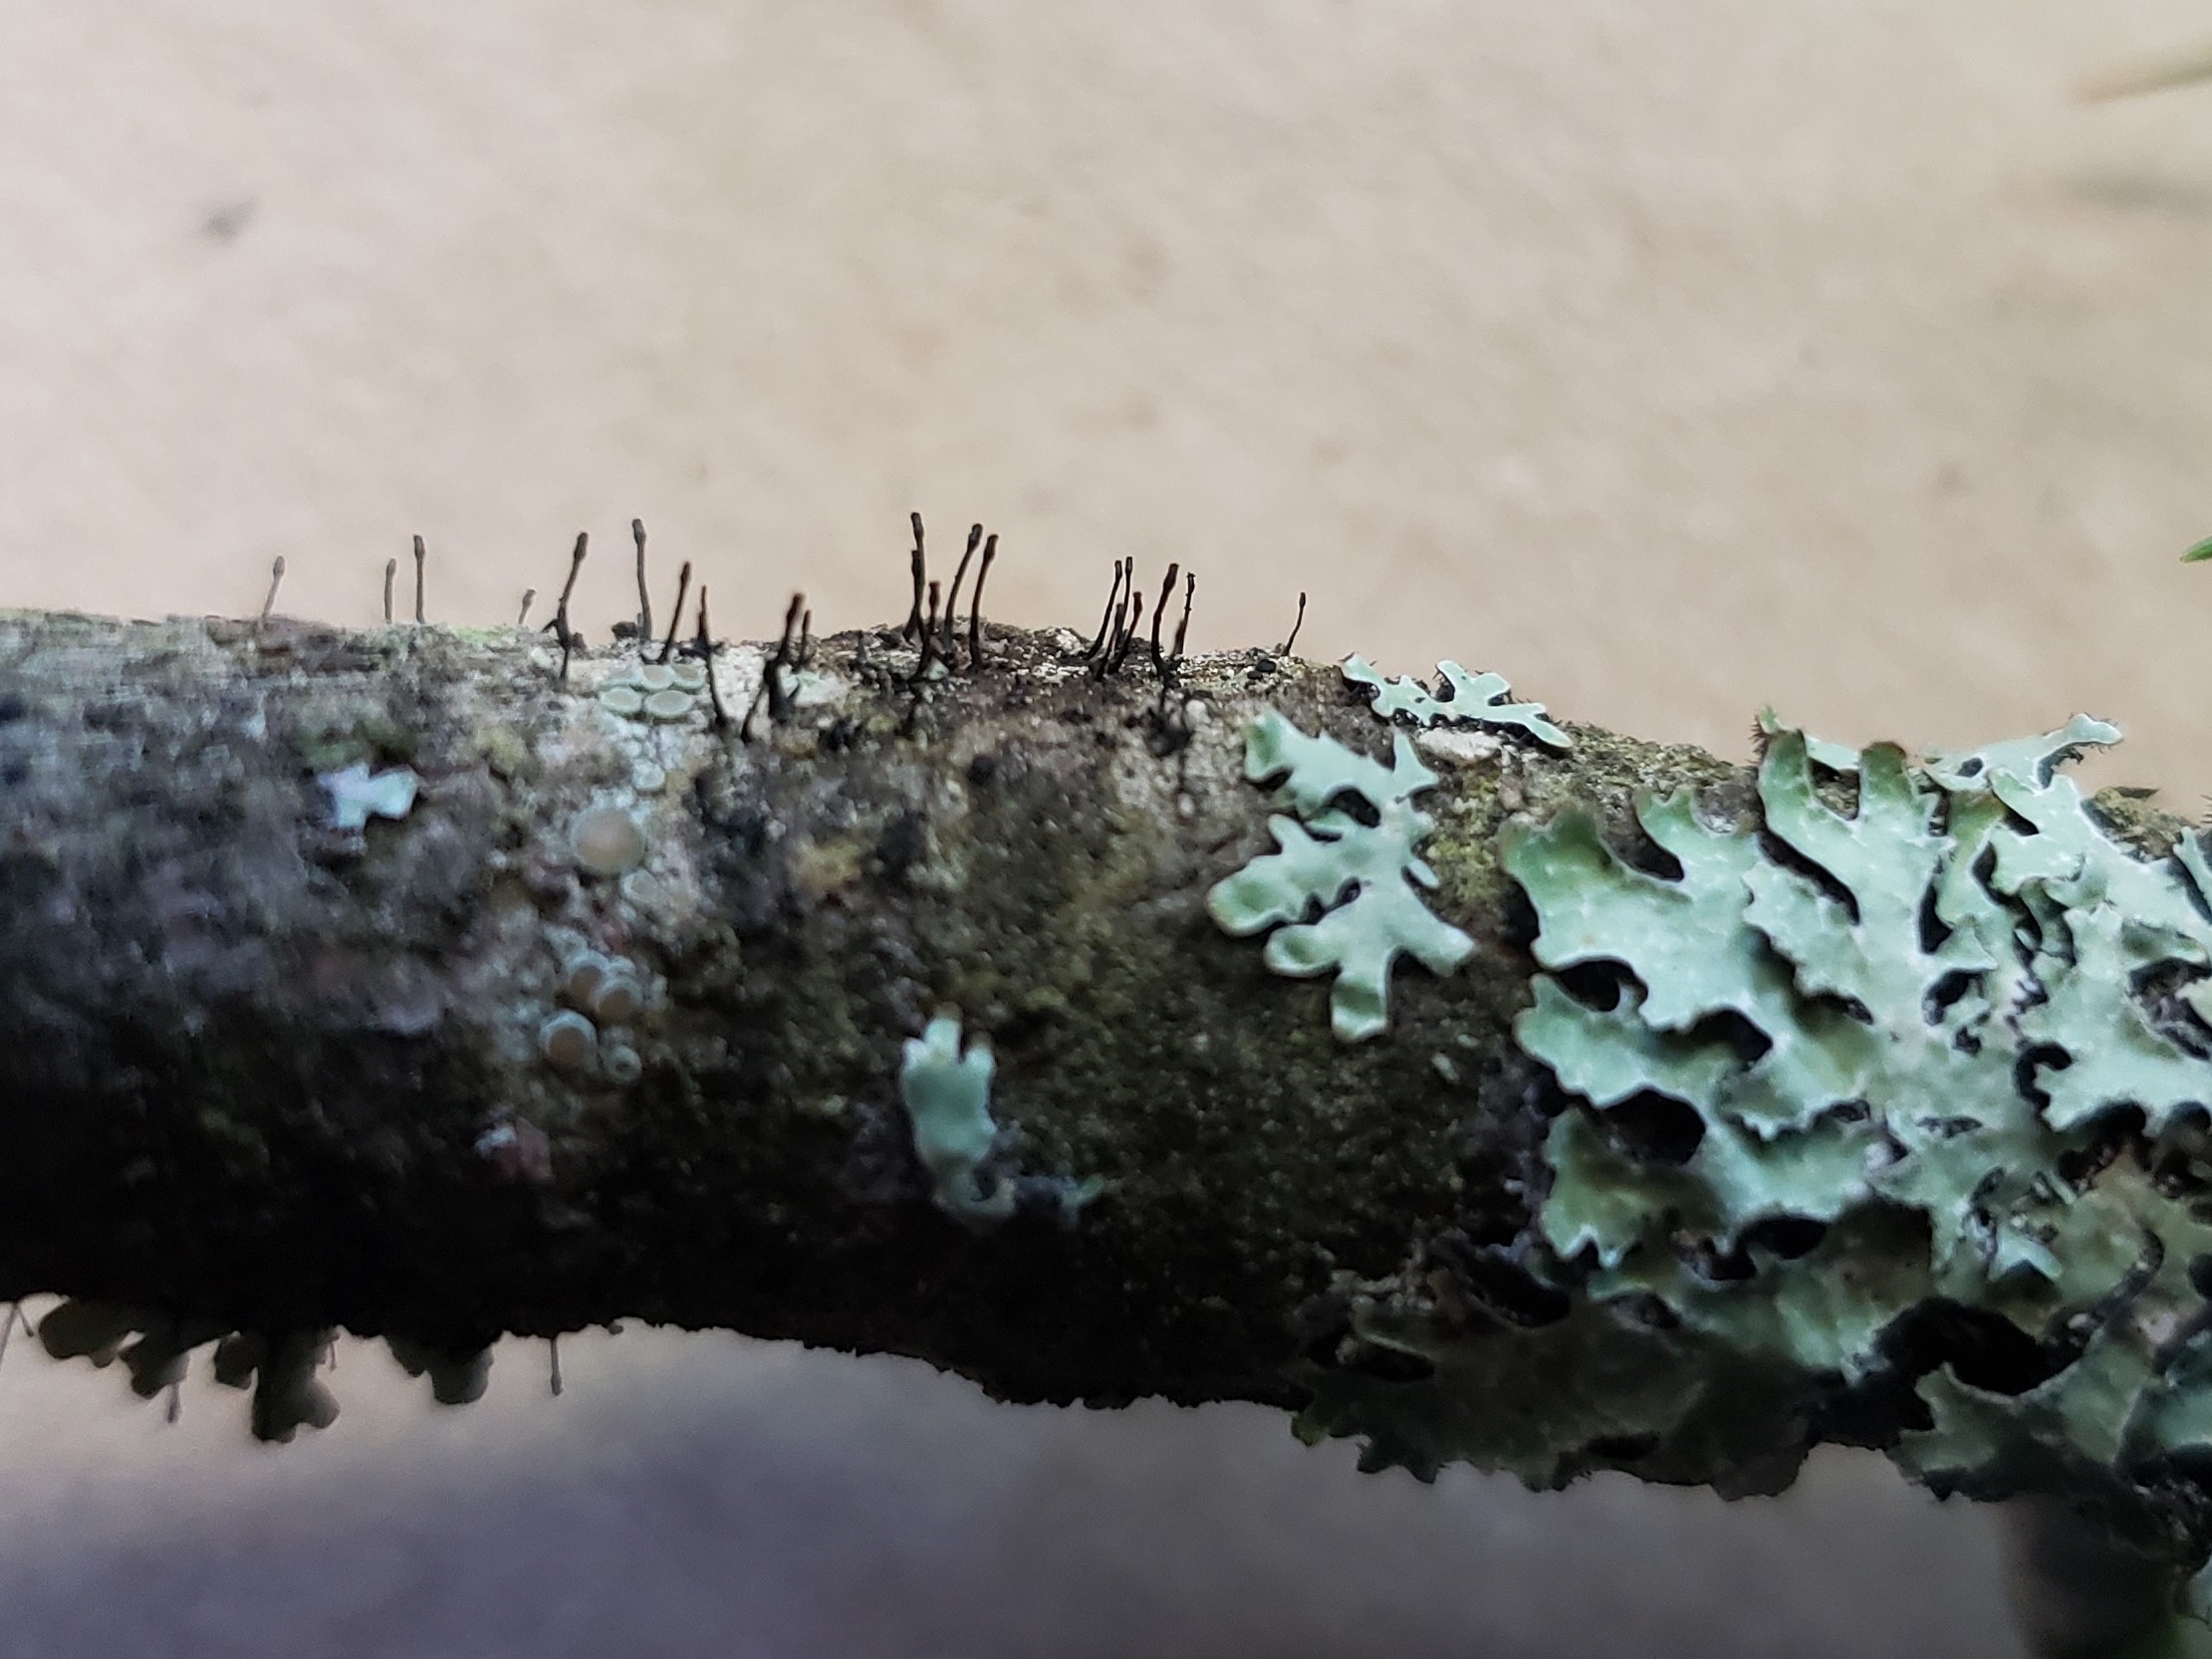 A close-up of Caliciopsis fruiting structures on a branch, with lichen for size reference.